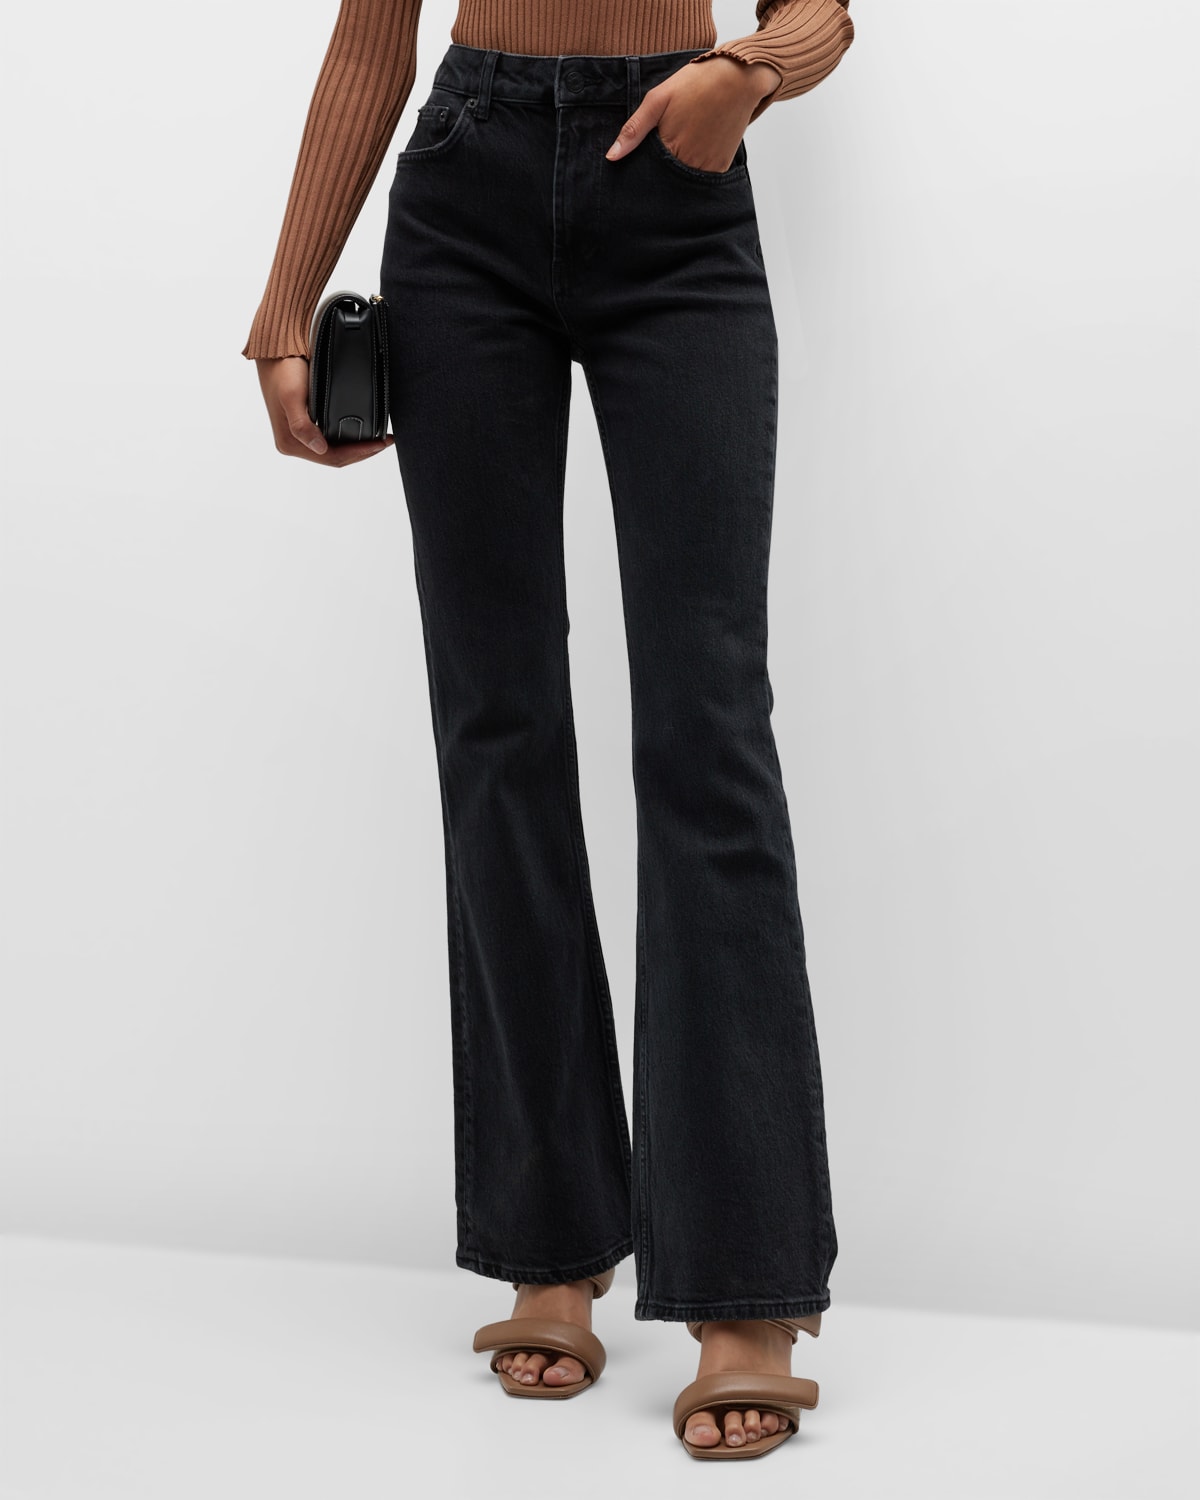 The Sunset High Rise Slim Bootcut Jeans